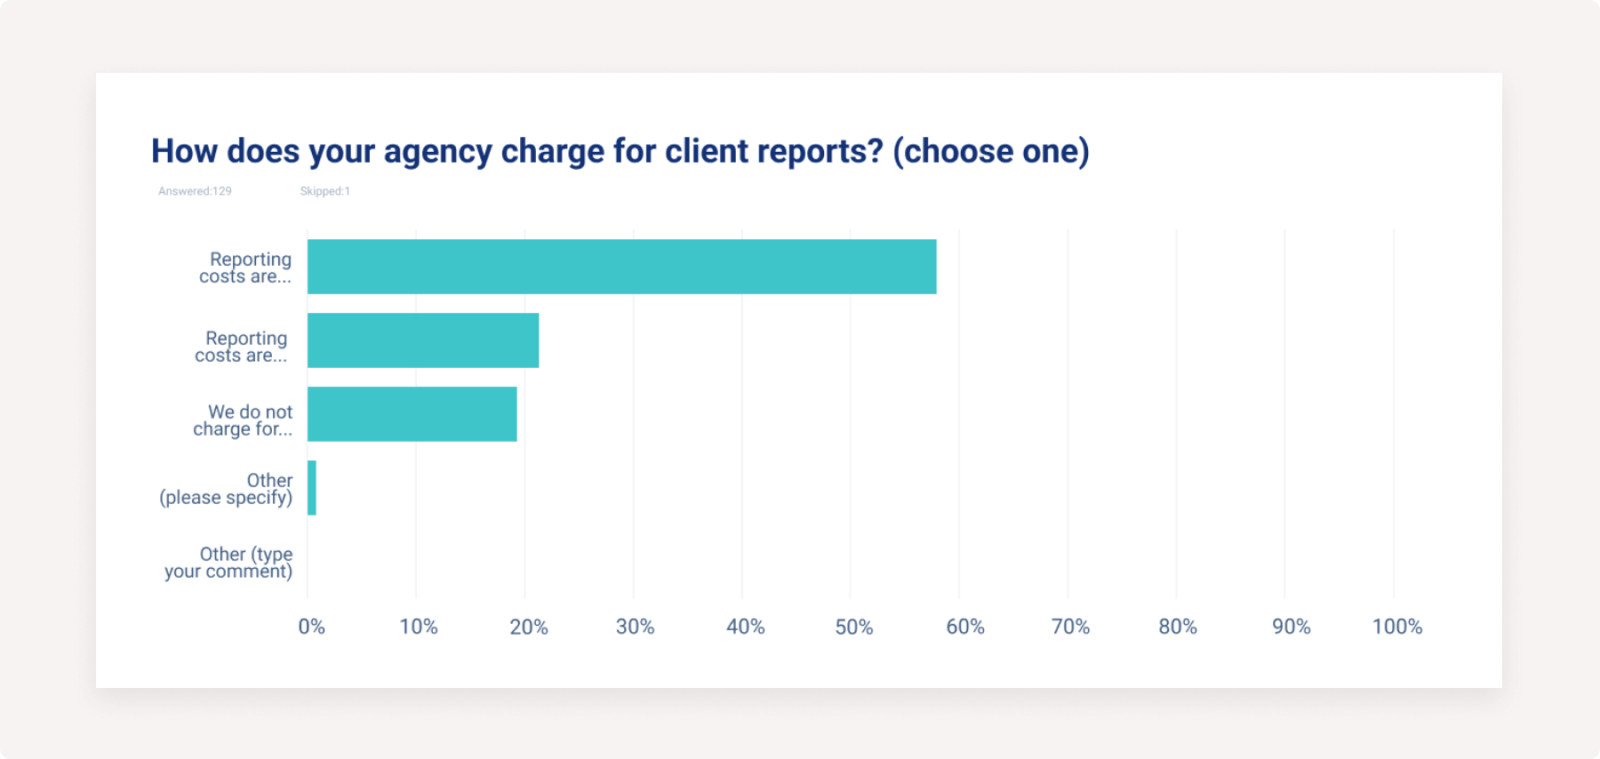 How does your agency charge for client reports